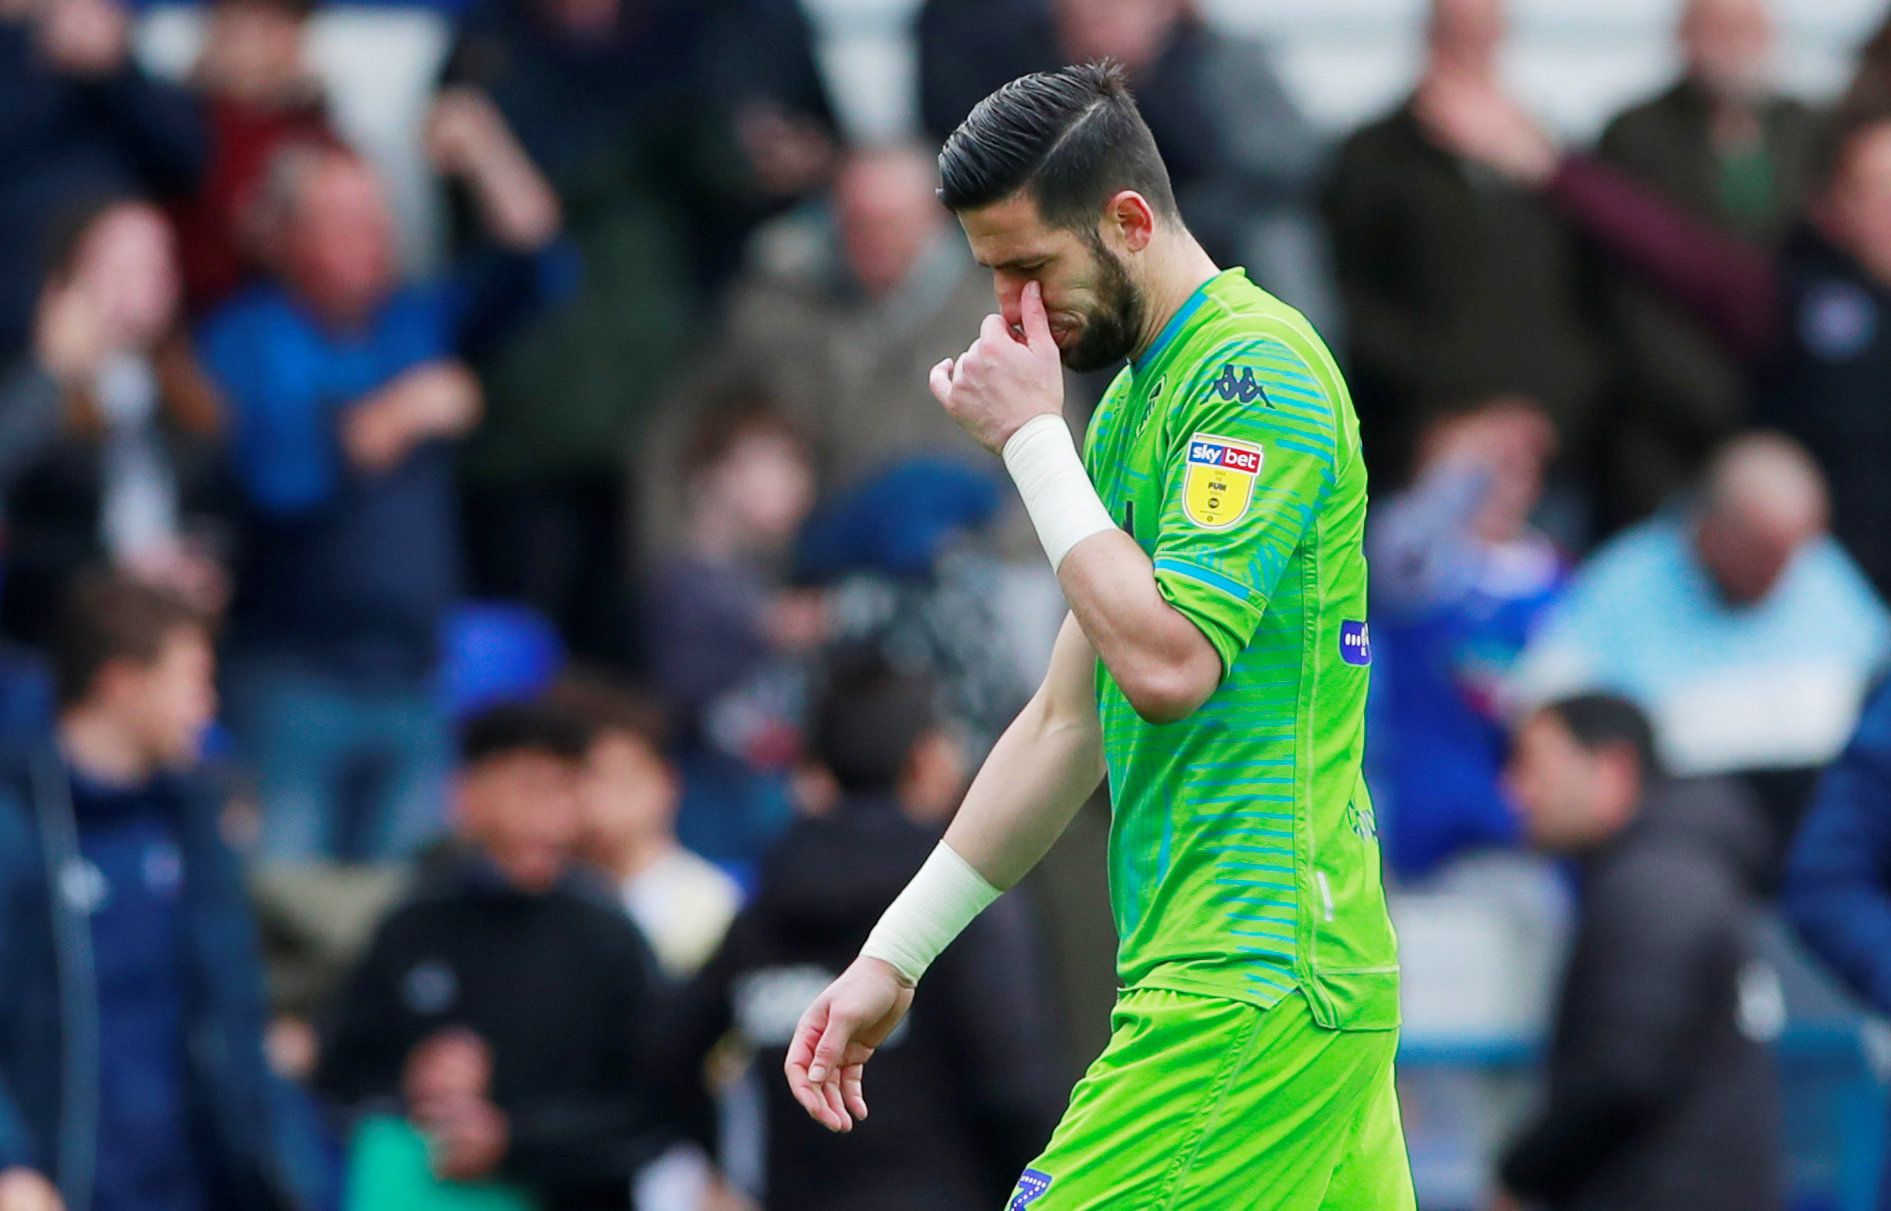 Soccer Football - Championship - Ipswich Town v Leeds United - Portman Road, Ipswich, Britain - May 5, 2019   Leeds United's Kiko Casilla looks dejected after the match     Action Images/Andrew Couldridge    EDITORIAL USE ONLY. No use with unauthorized audio, video, data, fixture lists, club/league logos or 